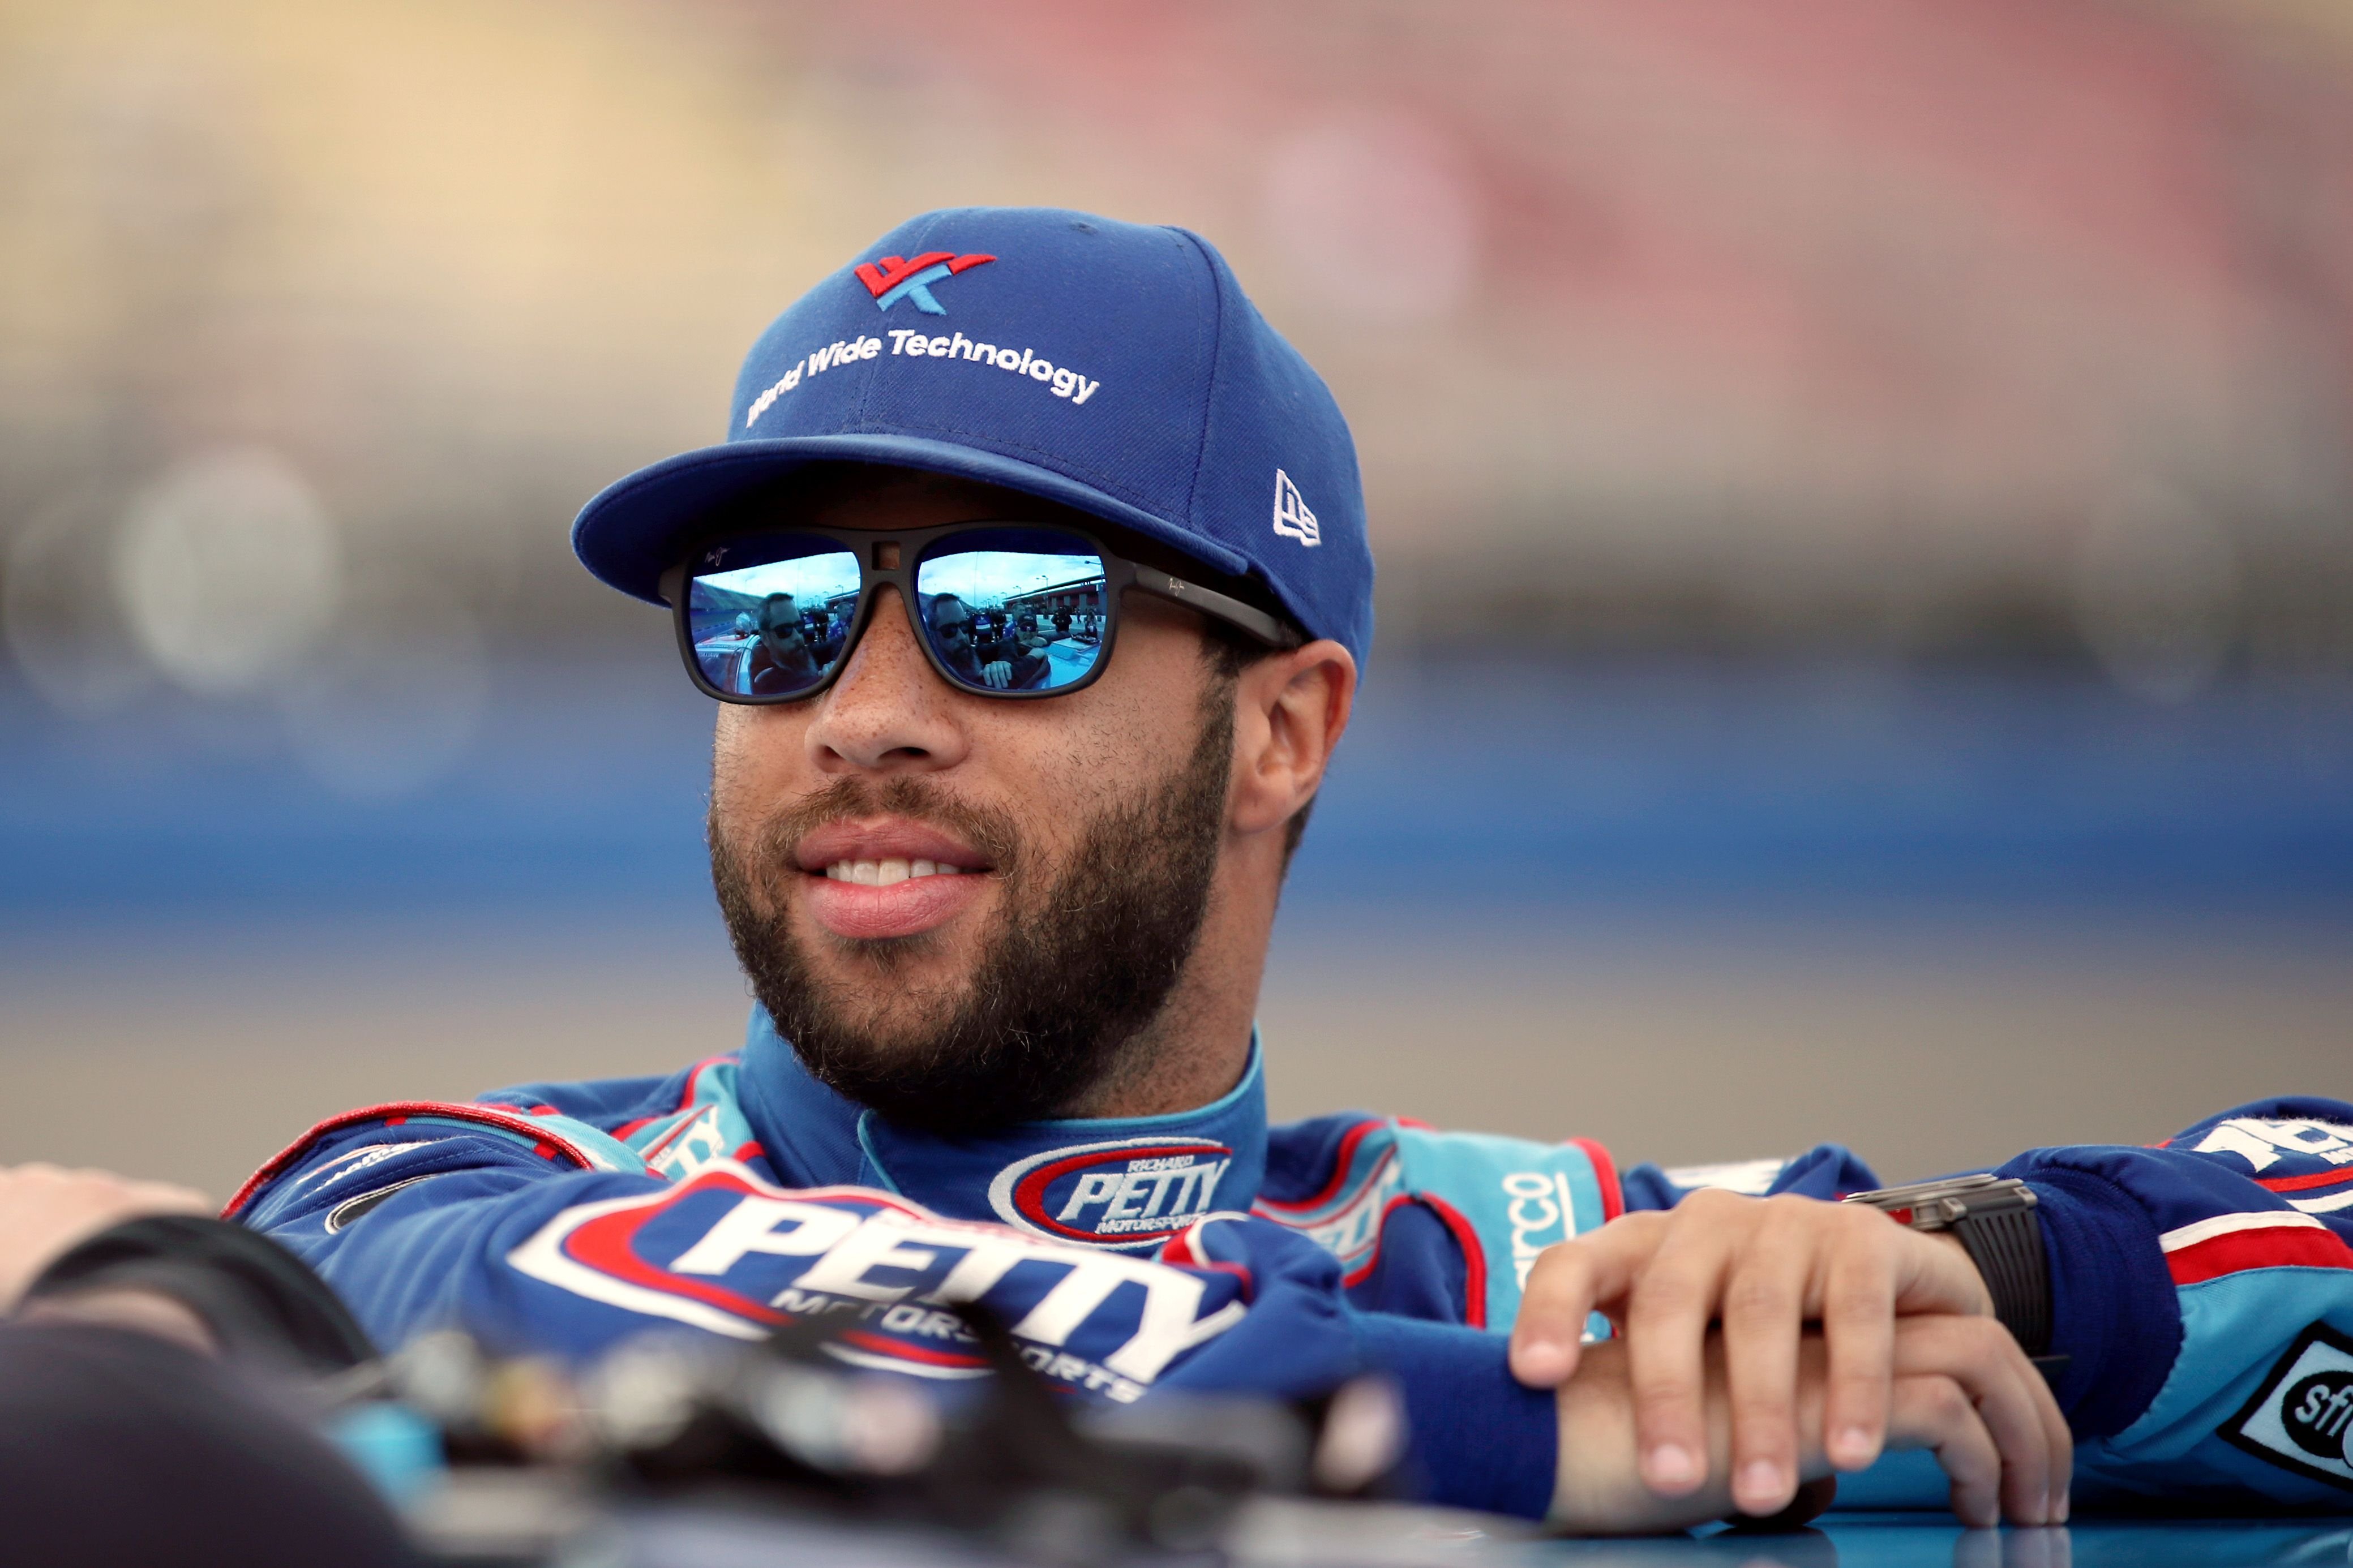 Race car driver Bubba Wallace before qualifying for the NASCAR Cup Series Auto Club 400 at Auto Club Speedway in February 2020. | Photo: Getty Images